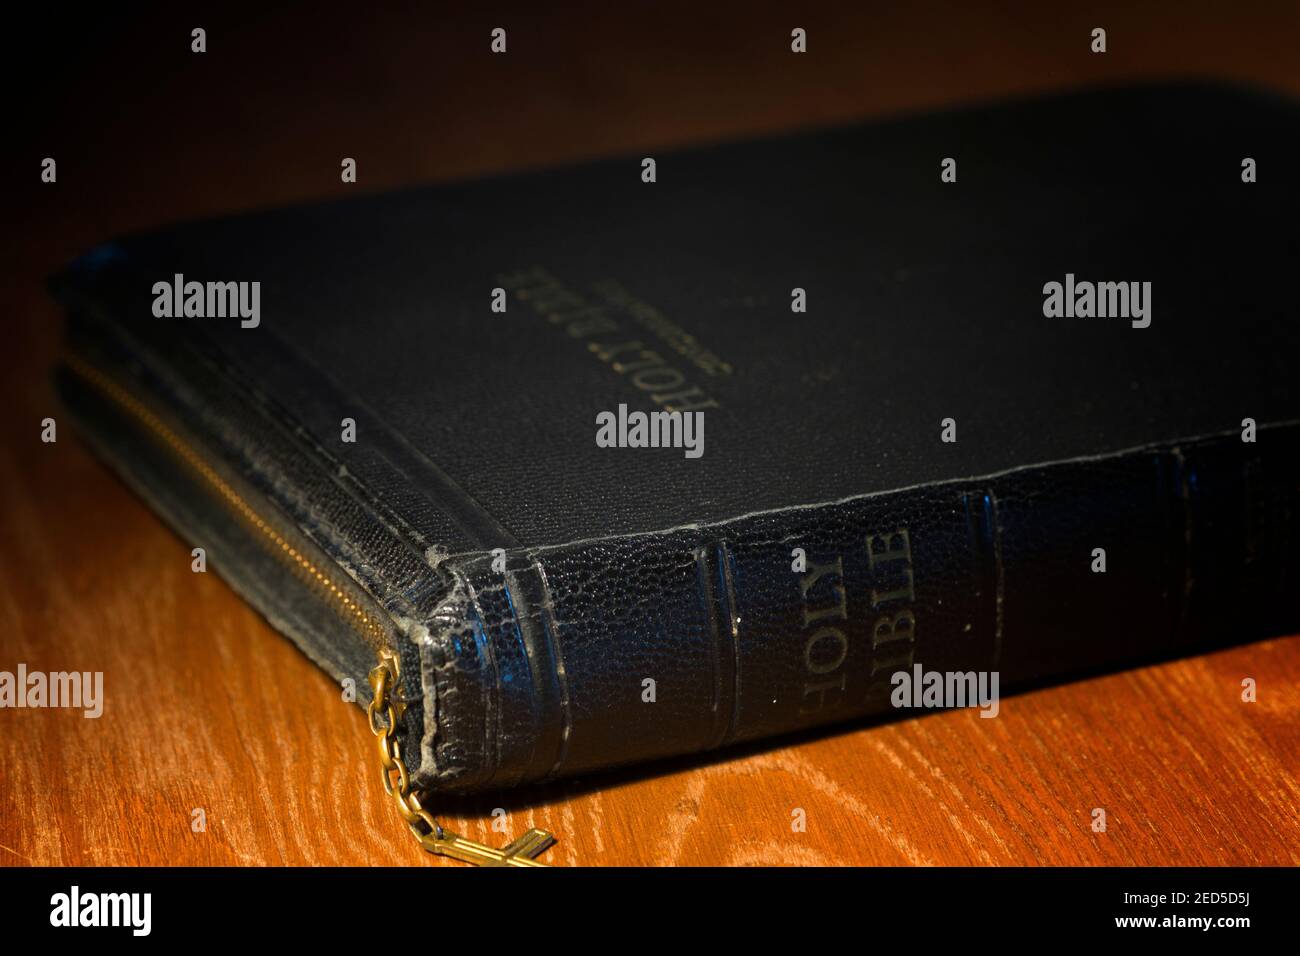 Close up photo of a zippered version of the King James Bible lying on an oak table. Stock Photo